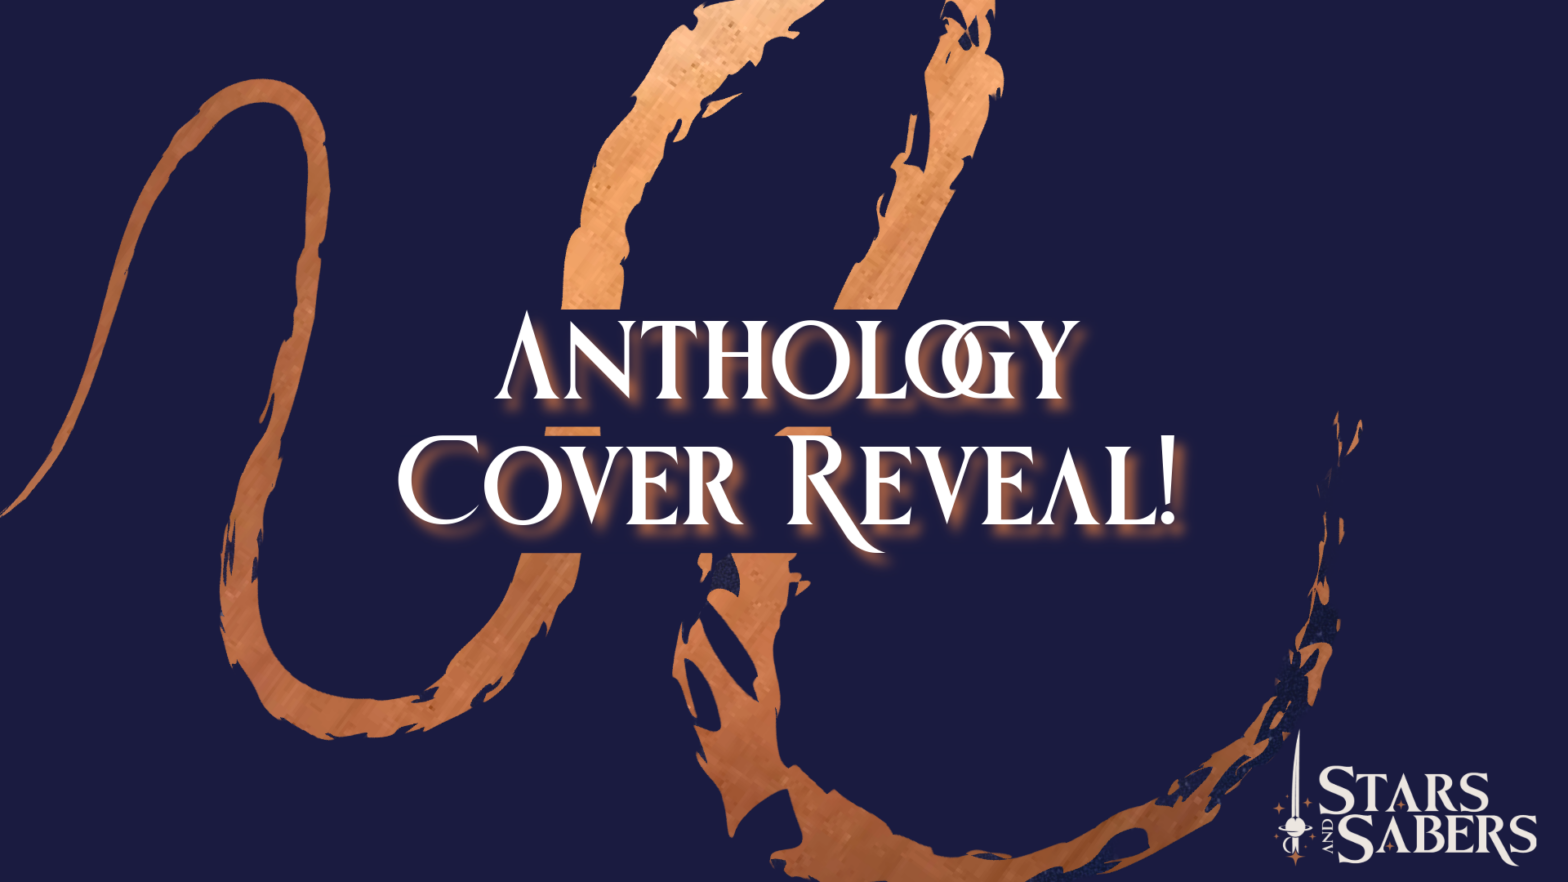 Anthology Cover Reveal copper swoop design on dark blue background Stars and Sabers publishing logo